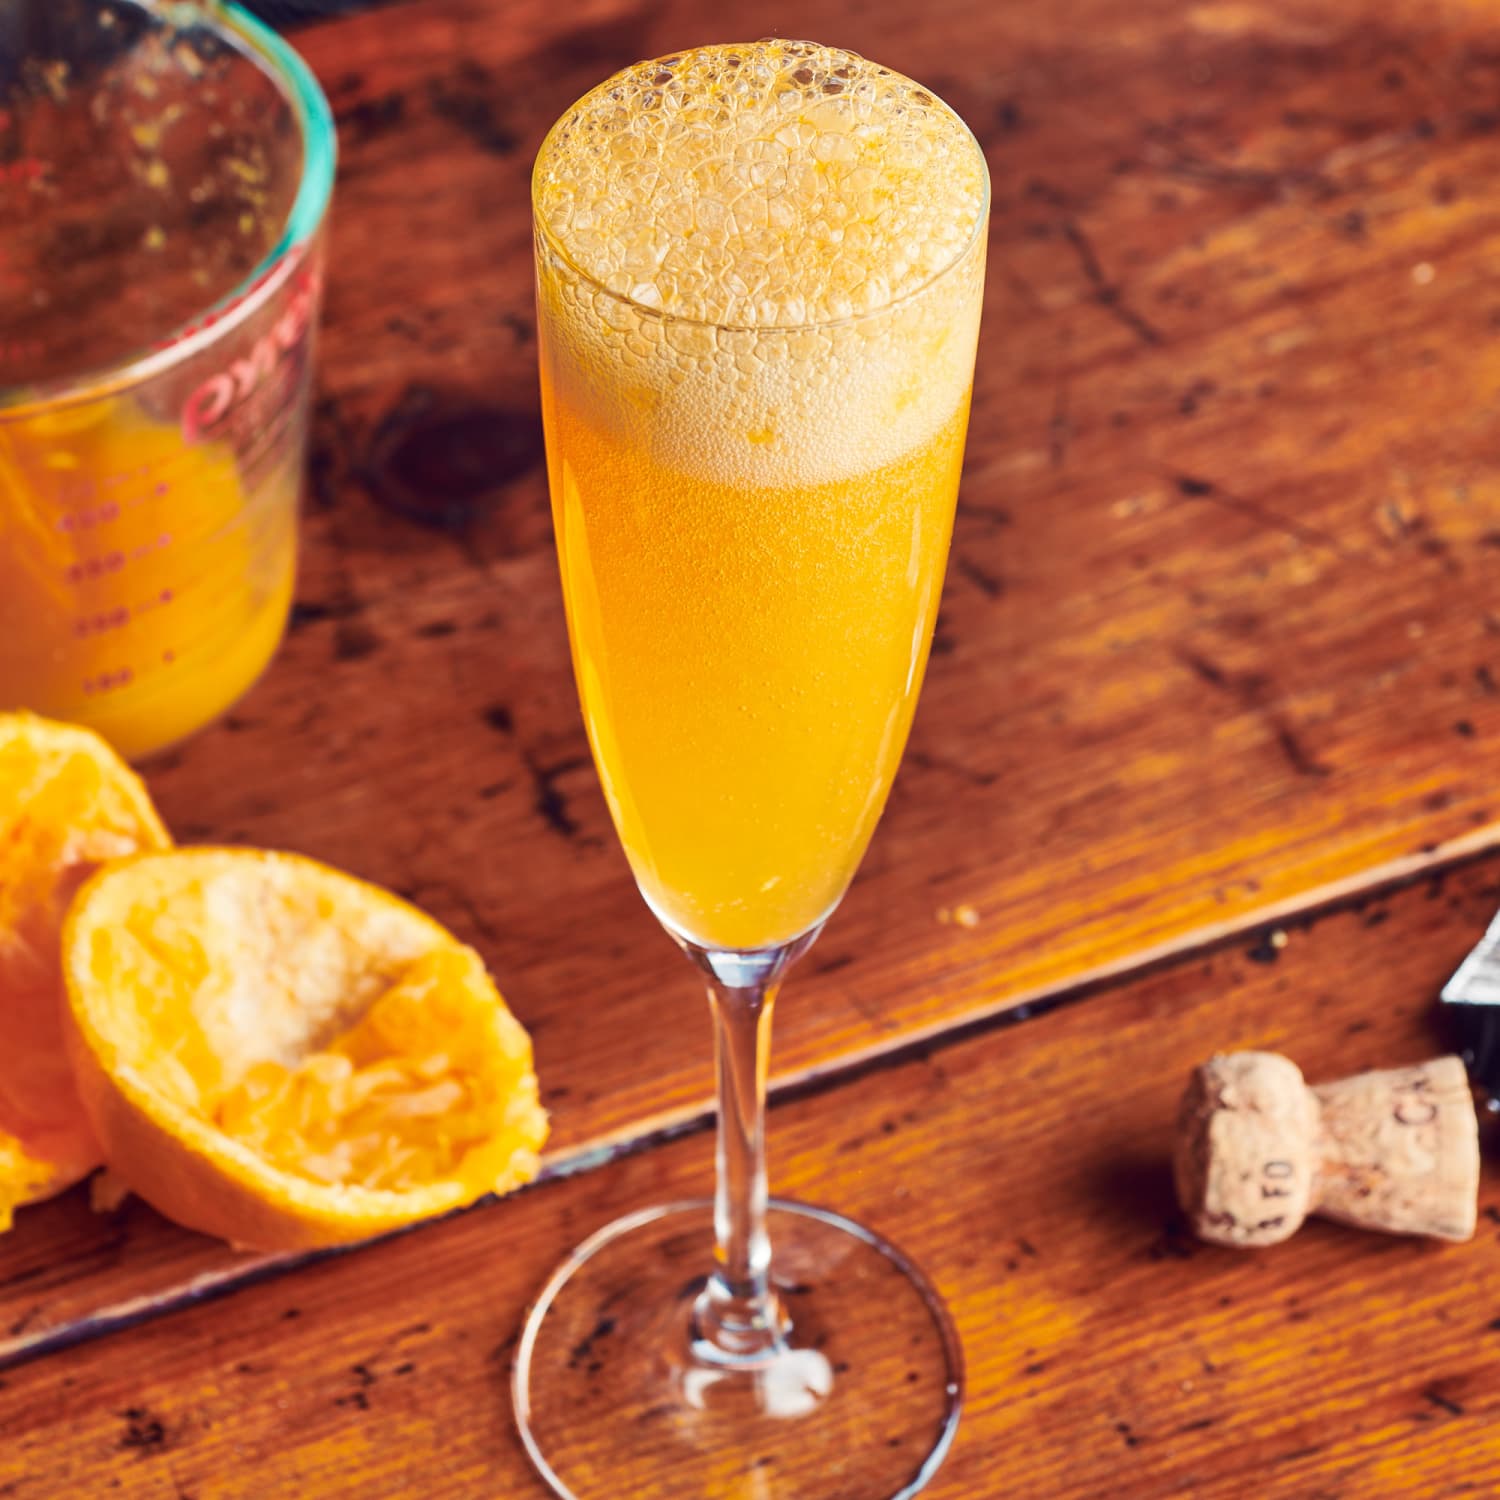 Mimosa cocktail: the recipe